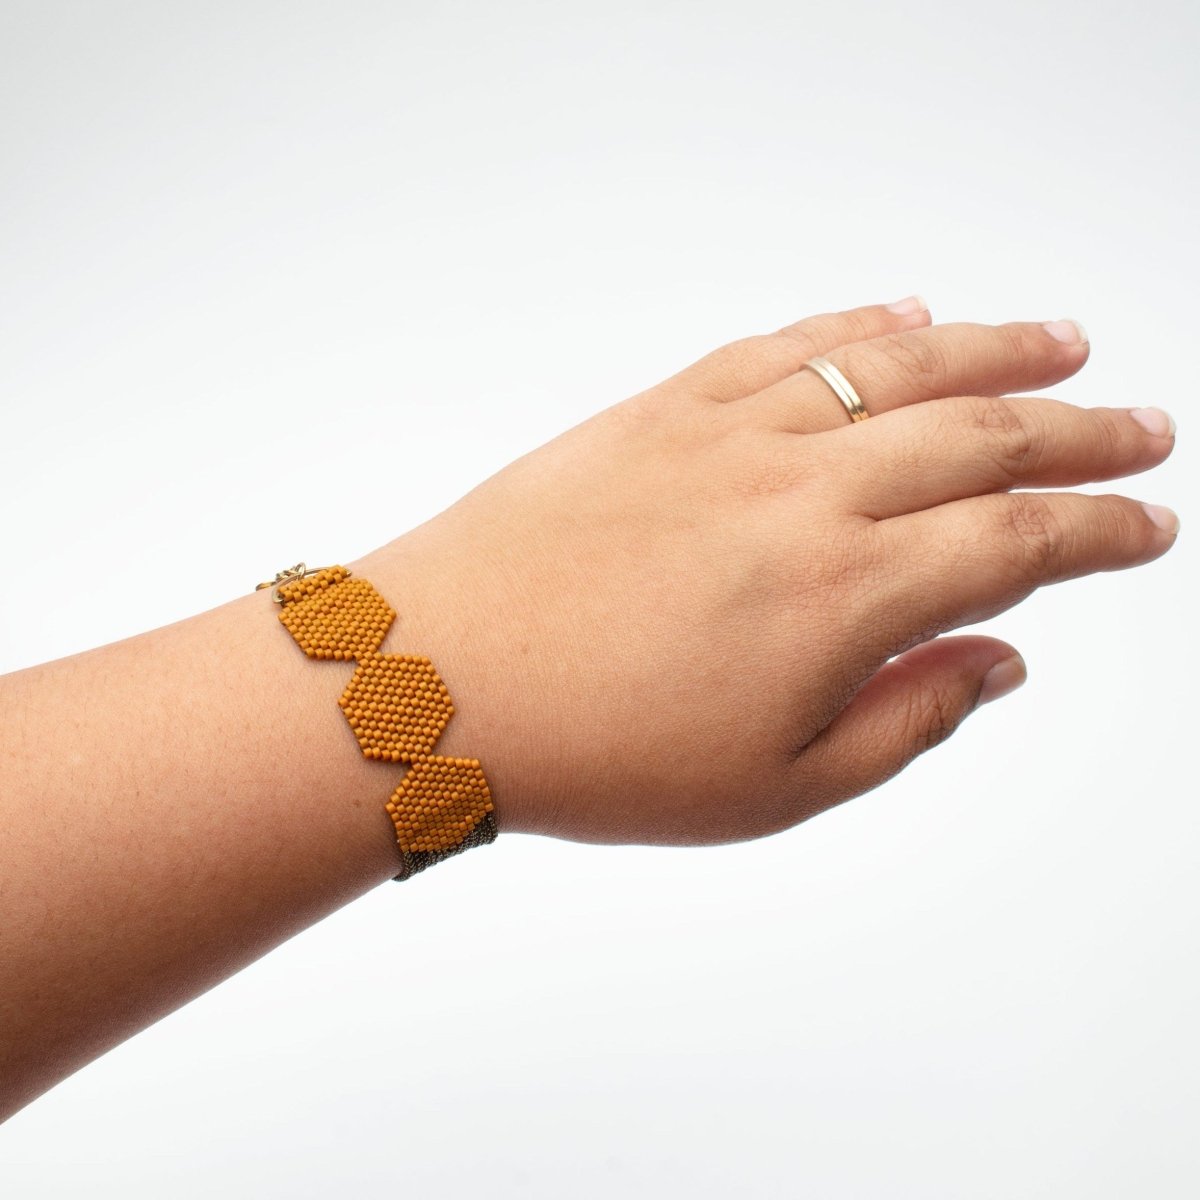 A model wears a hexagon beaded bracelet made with burnt orange colored beads and antique brass chains. The Row Bracelet in Toast is designed and handmade by A Nod To Design in Portland, OR.